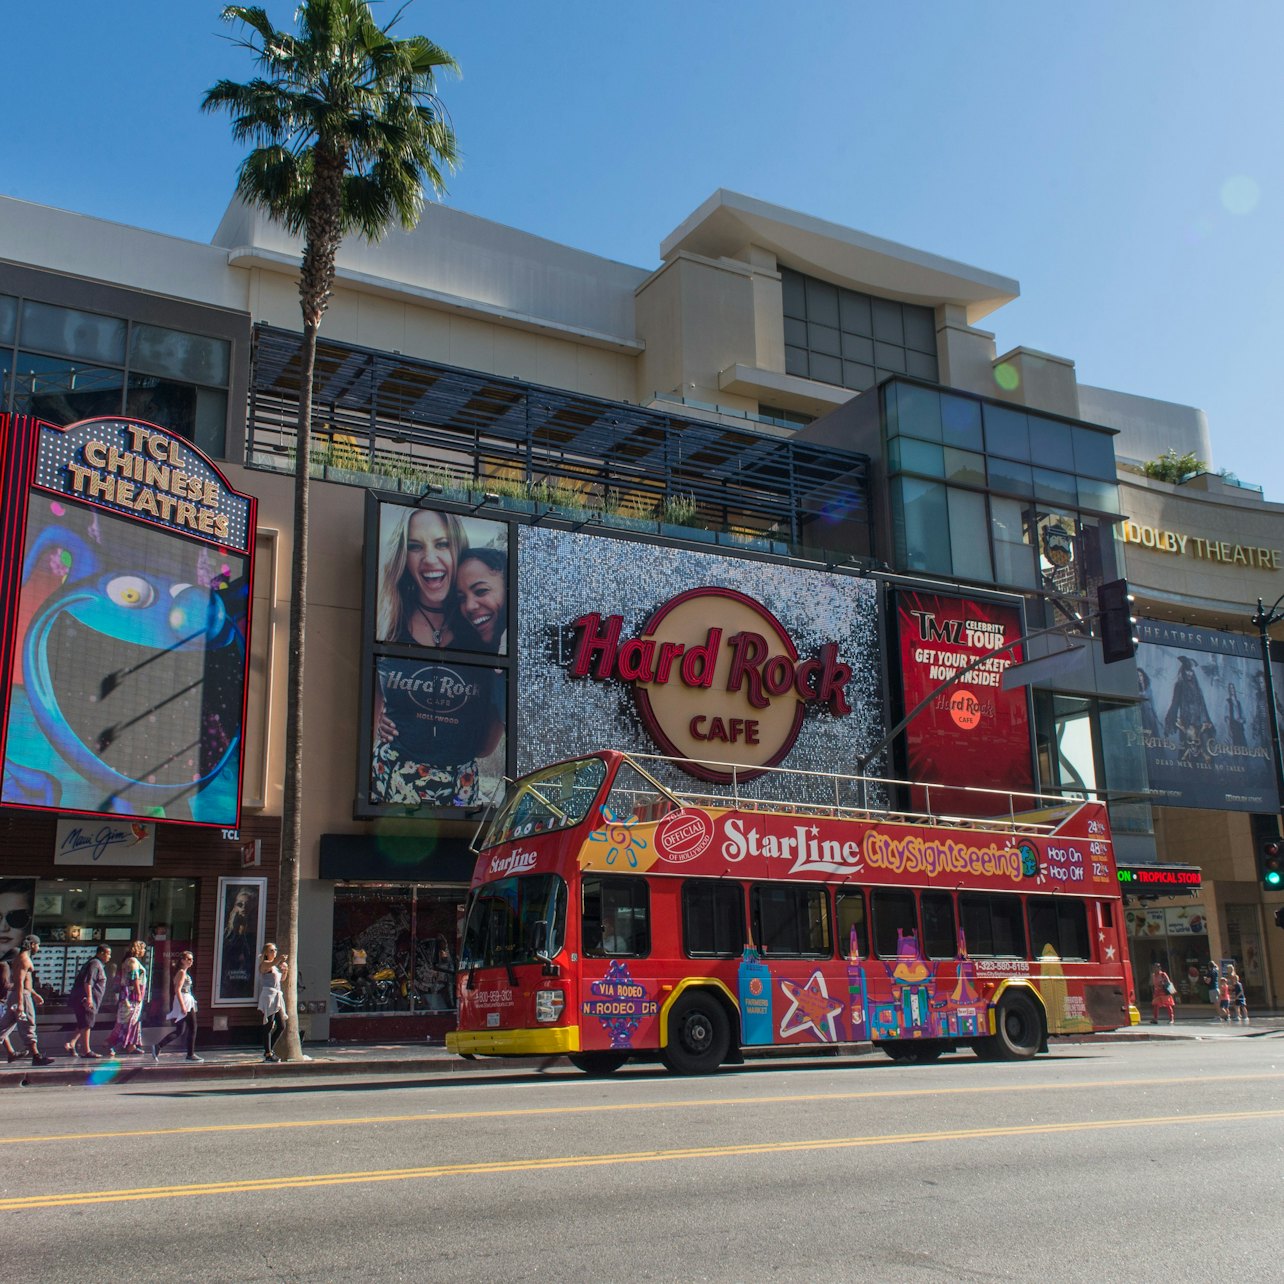 Los Angeles and Hollywood Hop-on Hop-off Bus - Accommodations in Los Angeles